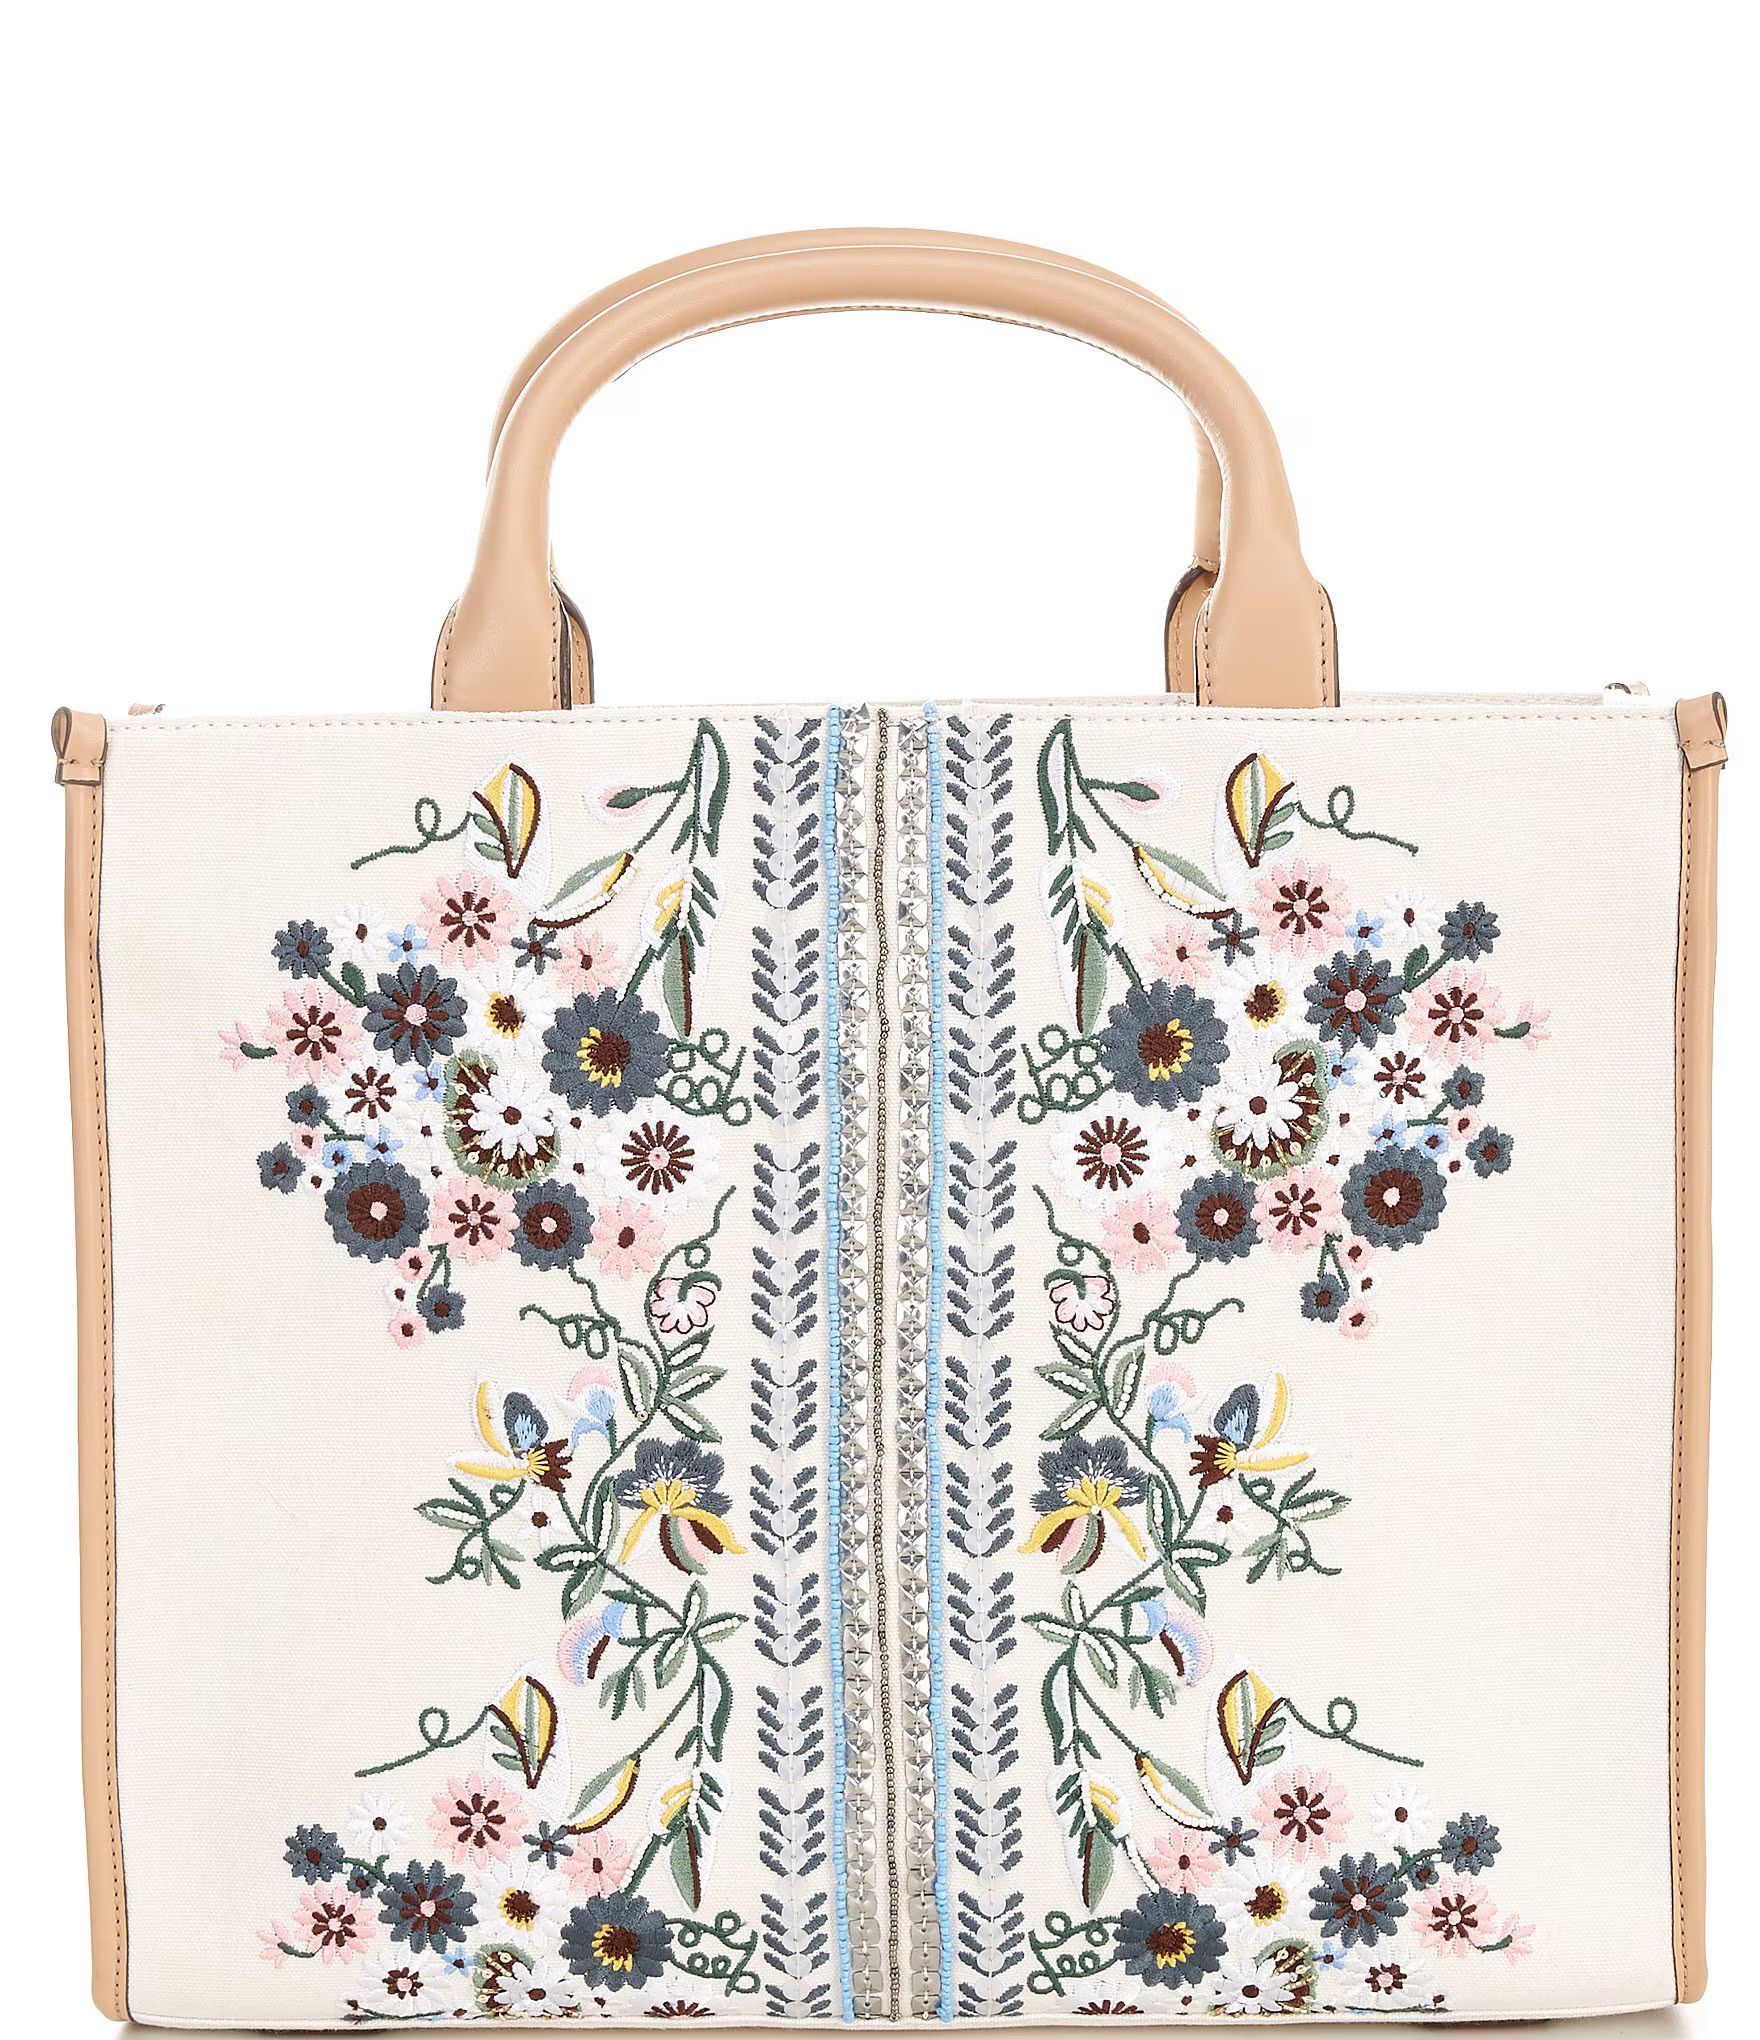 Floral Embroidered Tote Bag | Dillard's